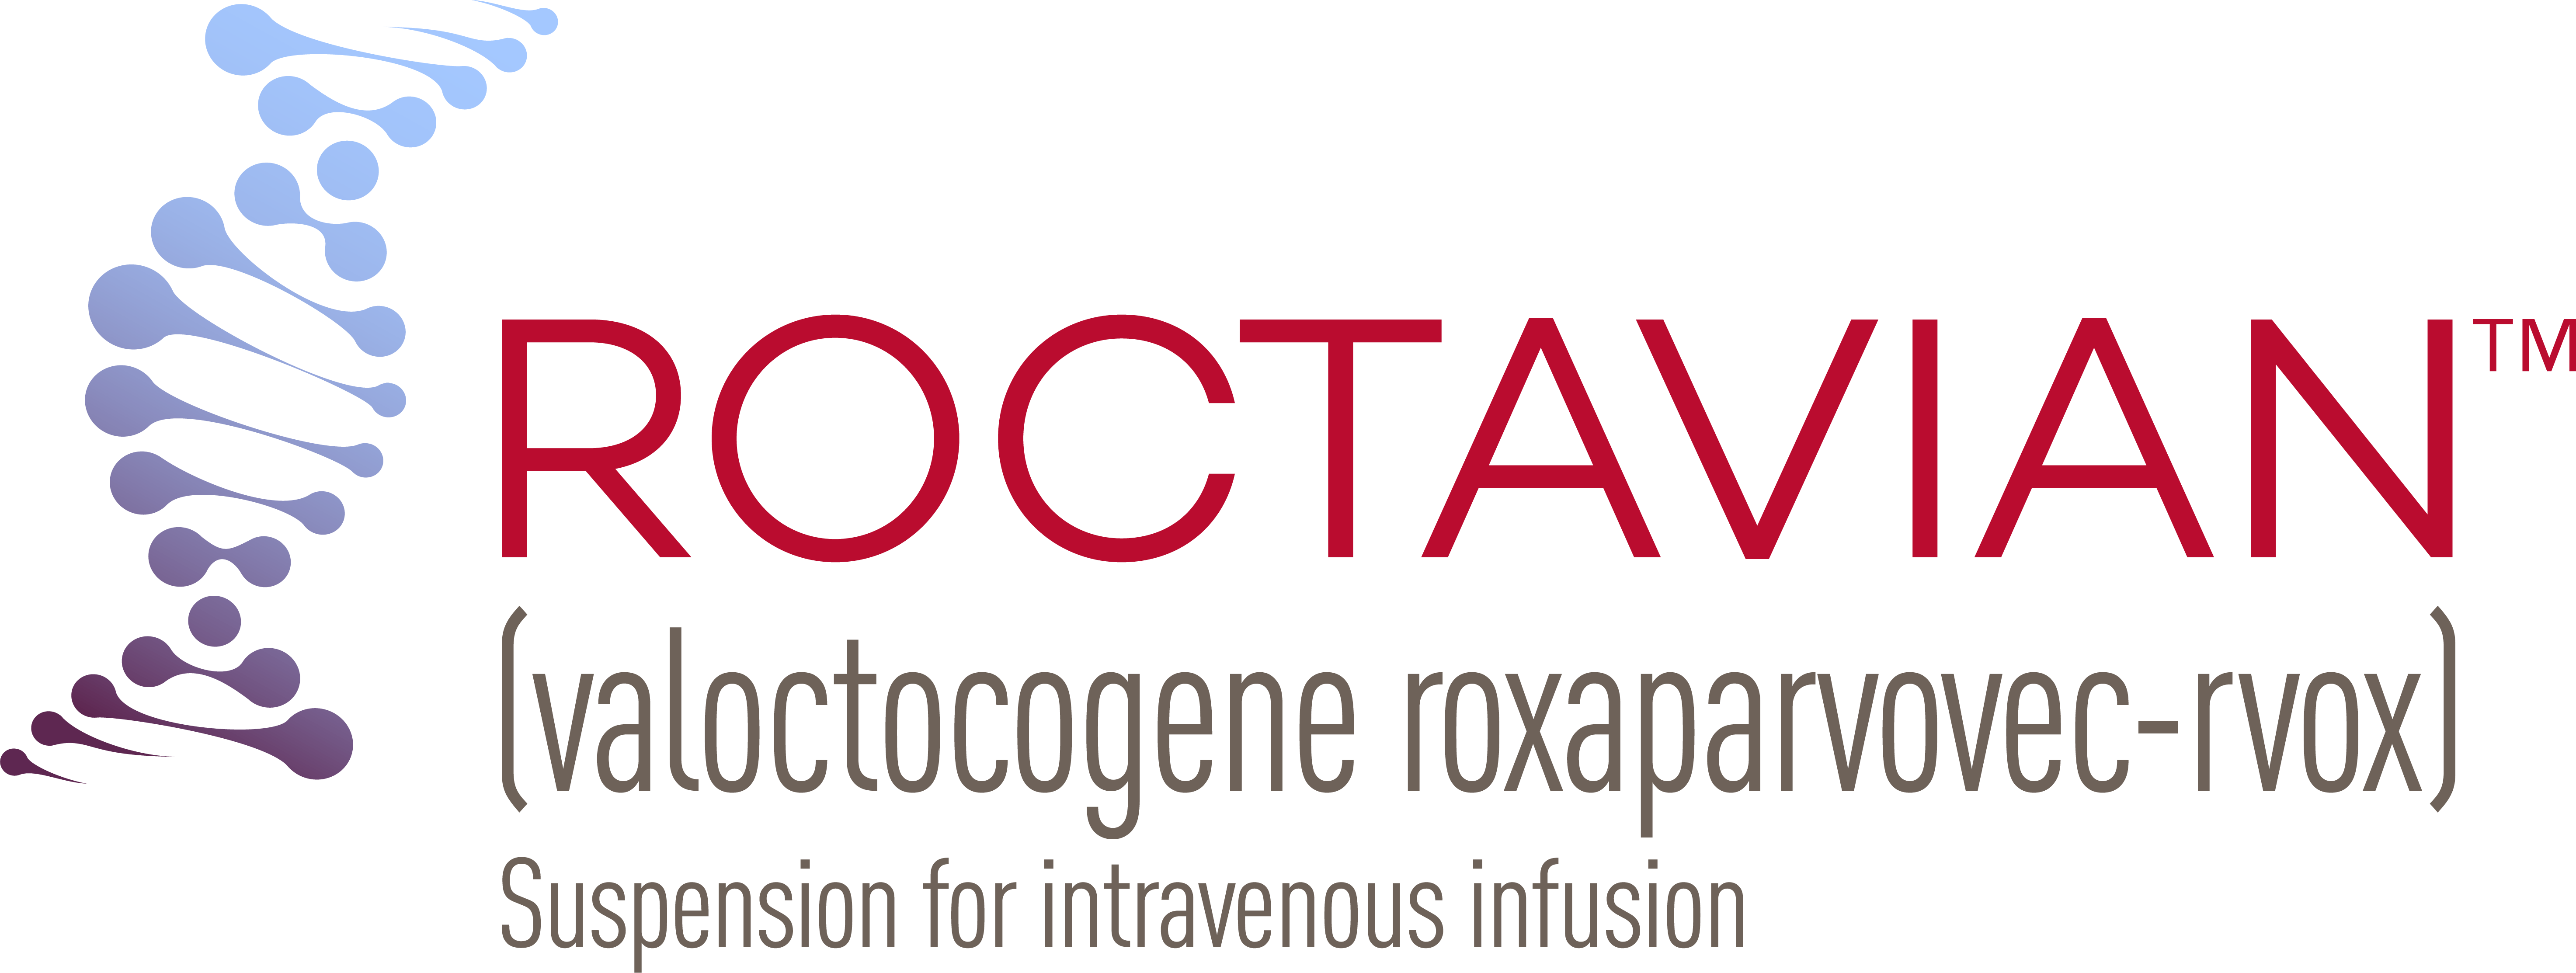 ROCTAVIAN (valoctocogene roxaparvovec-rvox) suspension for intravenous infusion. A graphic representation of a section of DNA